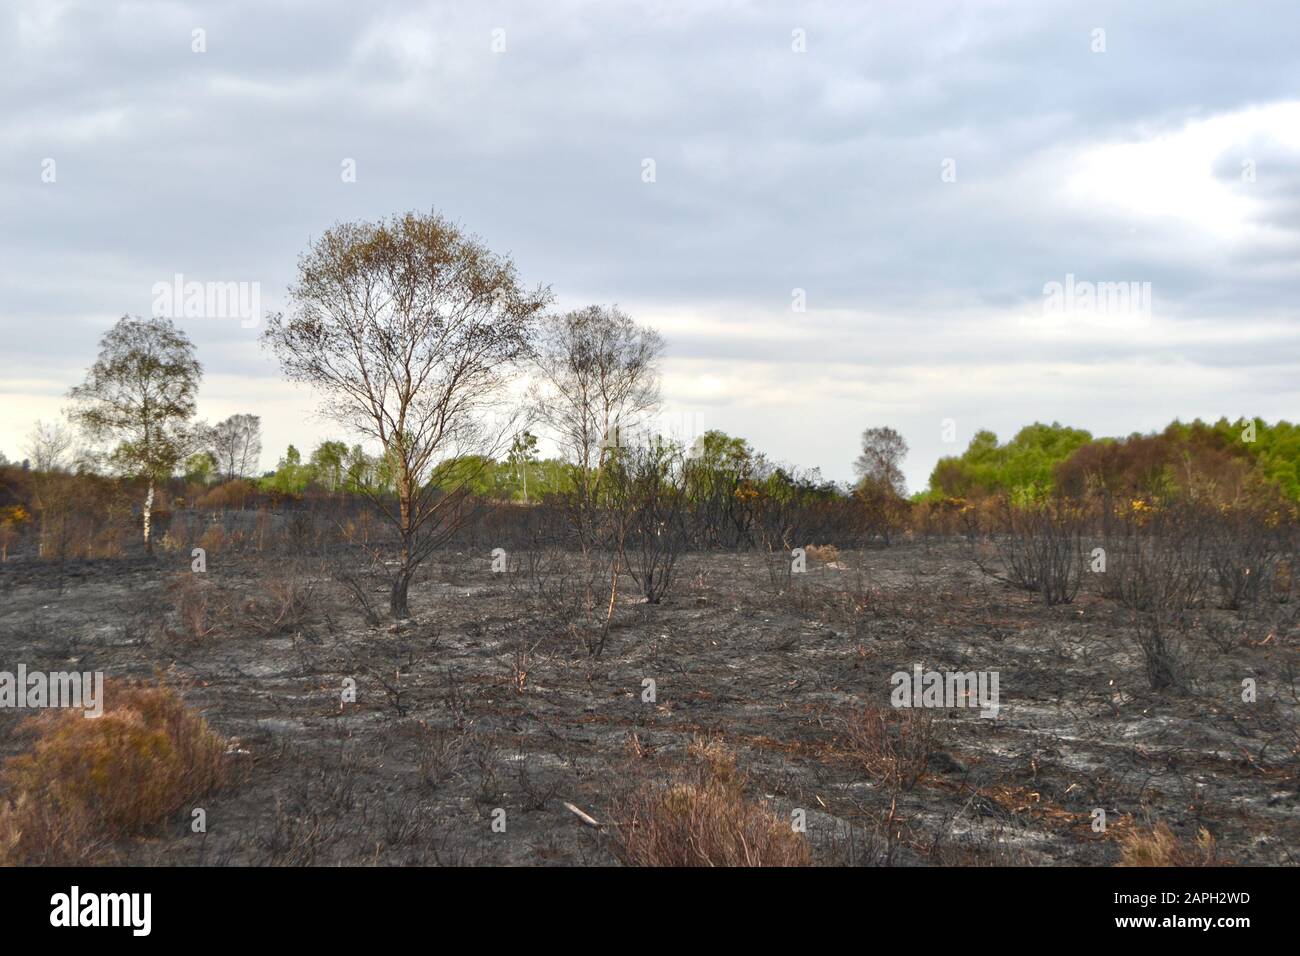 The burned, charred remains of trees, bushes and grasses in a heathland or moorland (old fashioned European forest) after a wild fire. Stock Photo